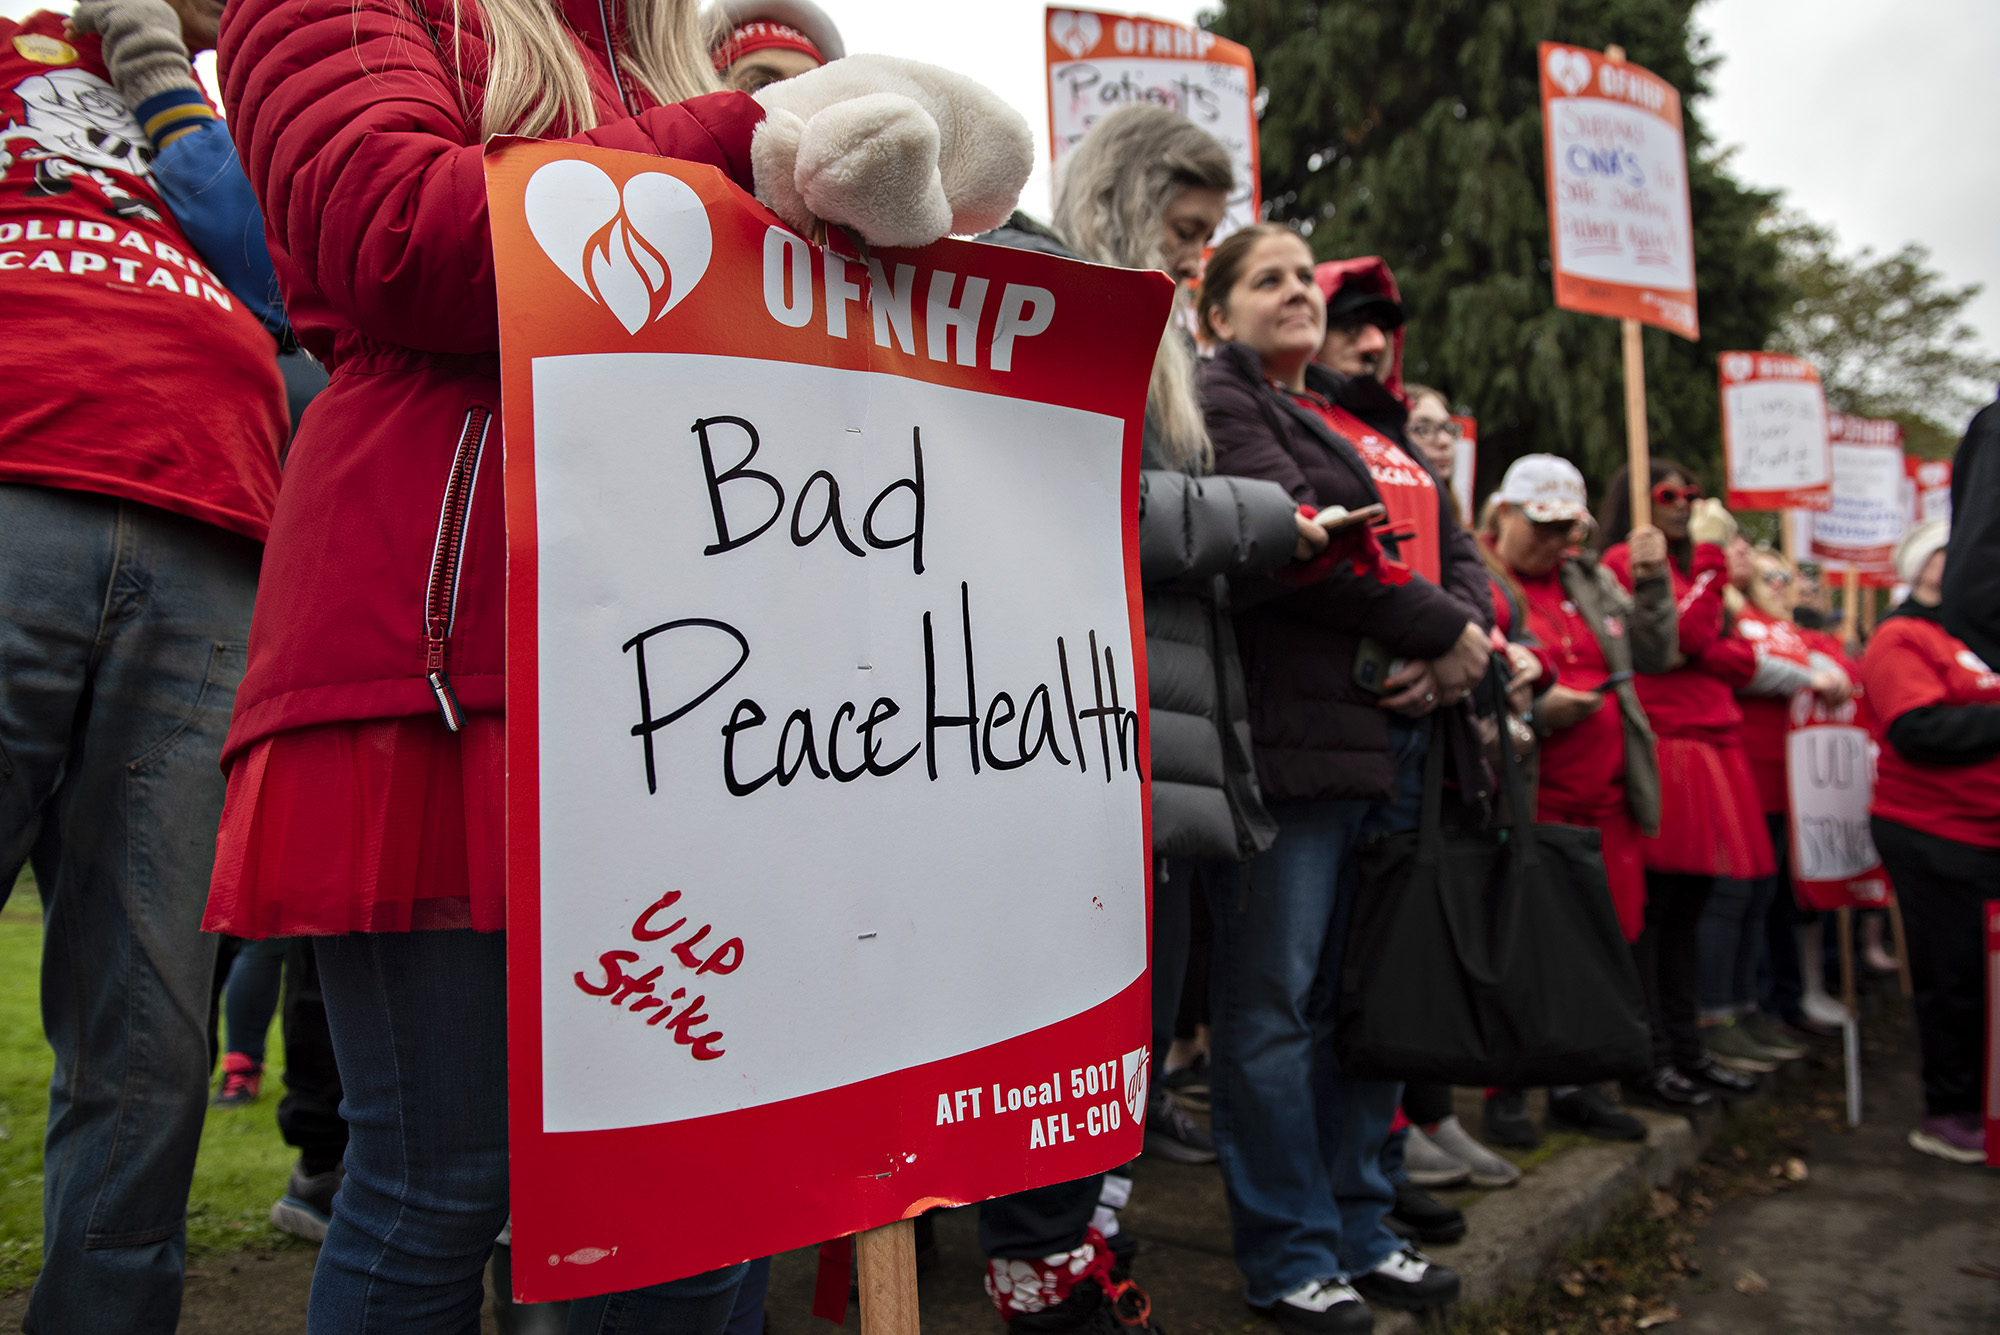 Five-day health care worker strike begins at PeaceHealth in